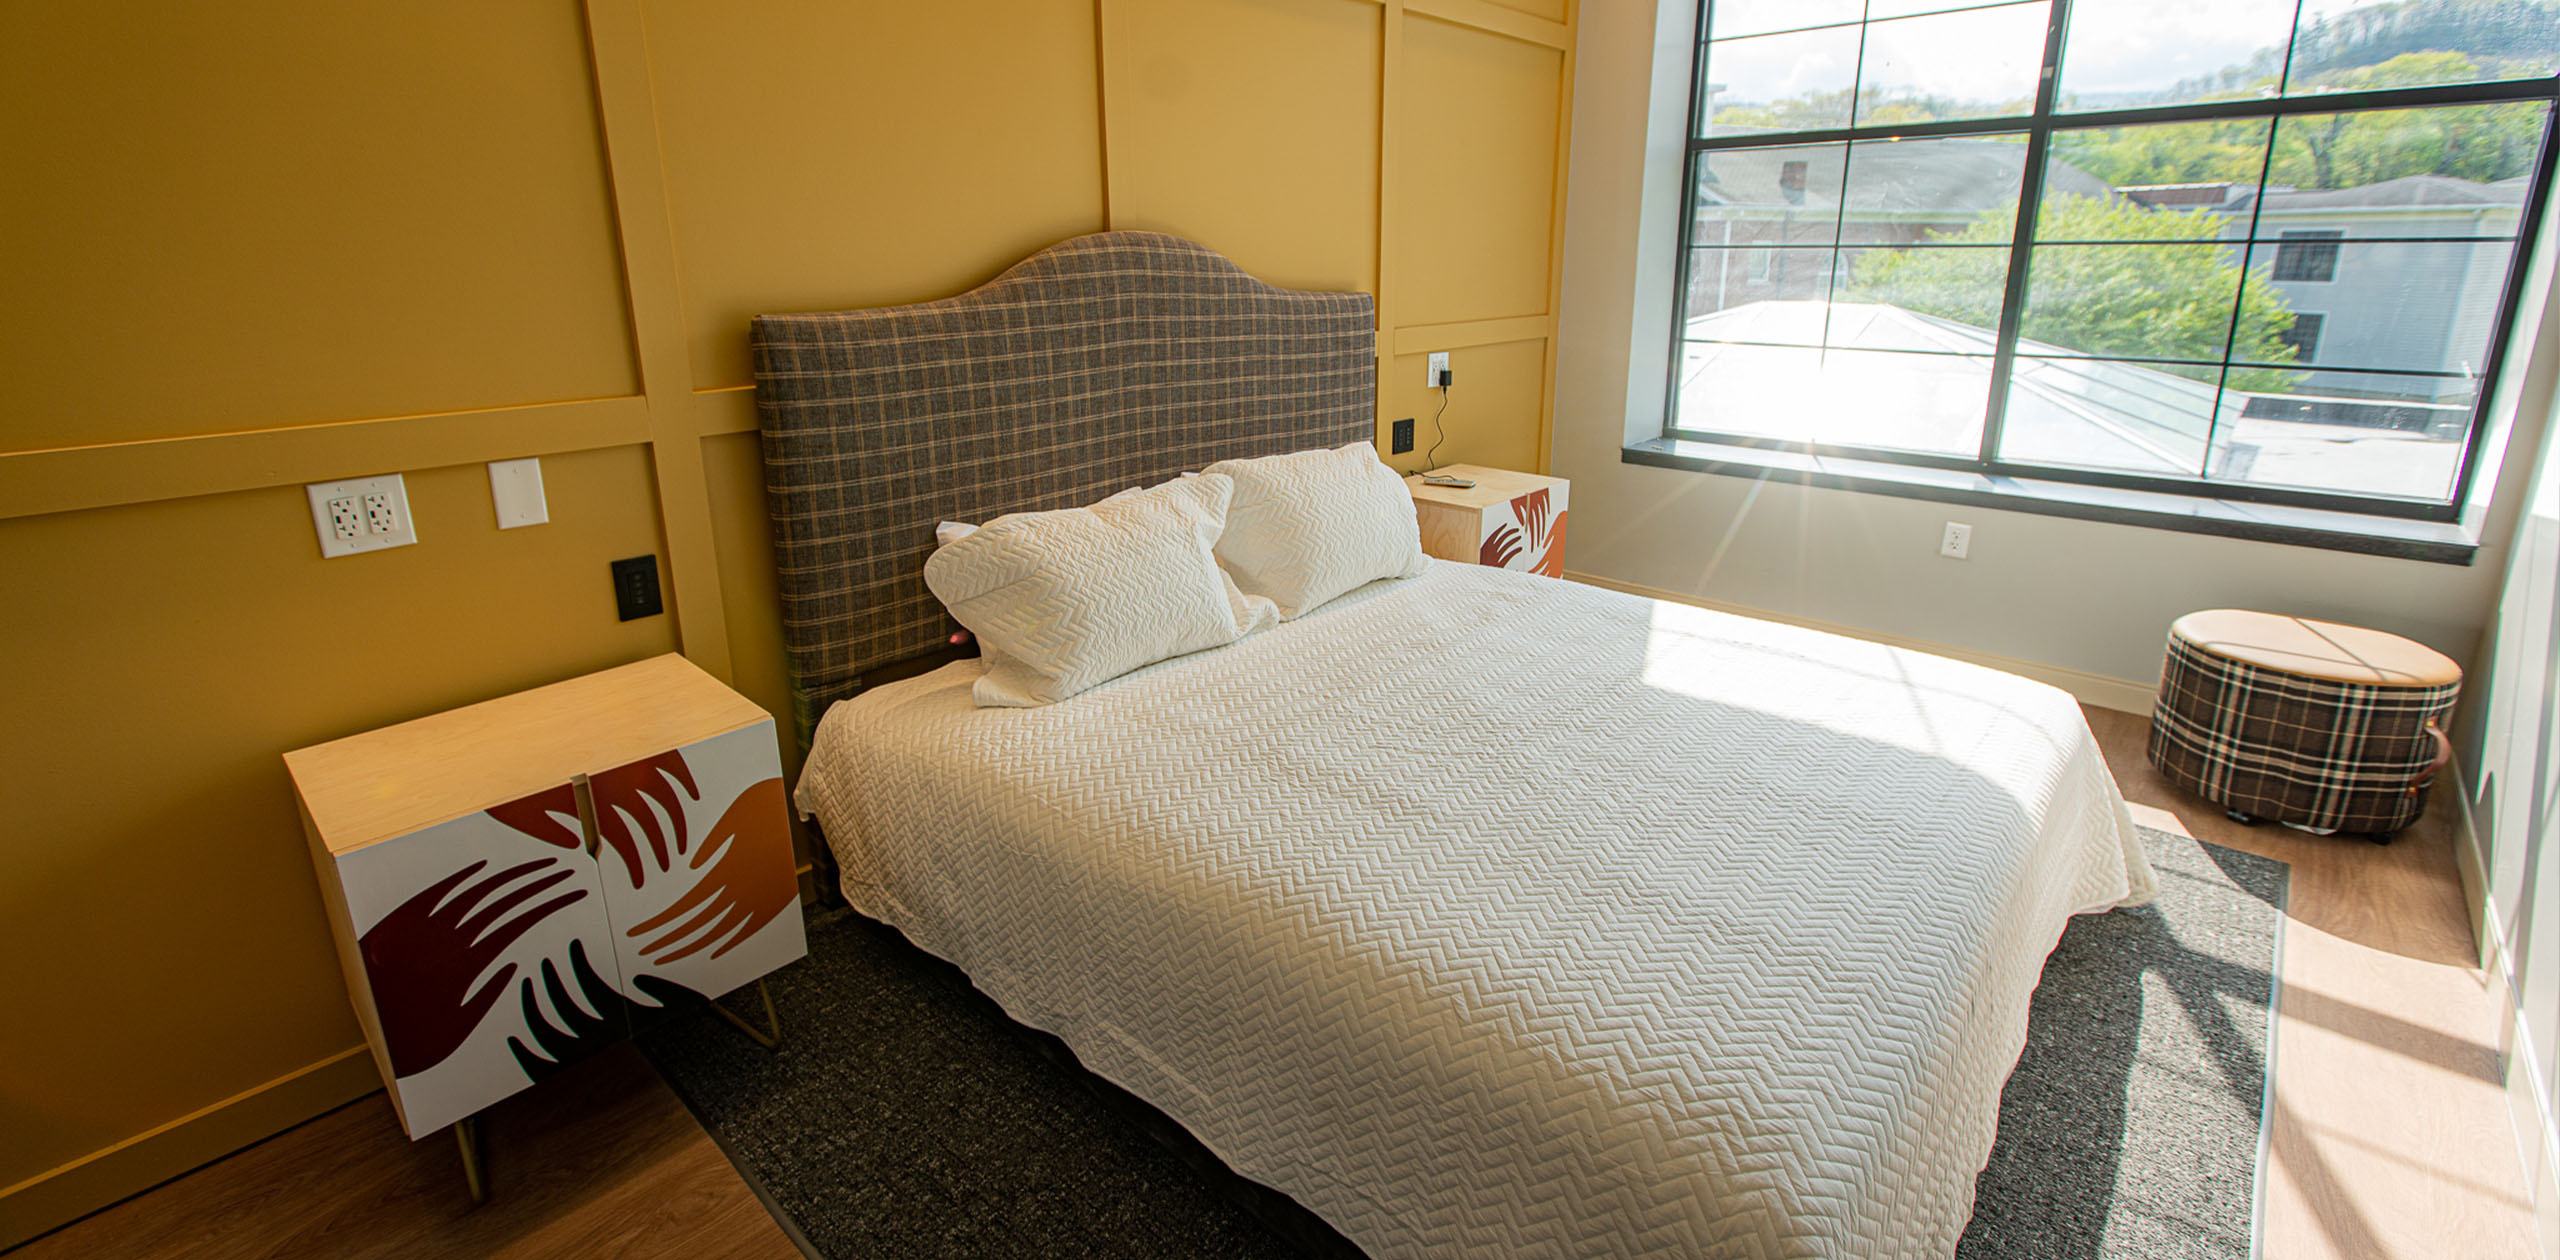 Guestrooms at the Schoolhouse Hotel are converted classrooms 